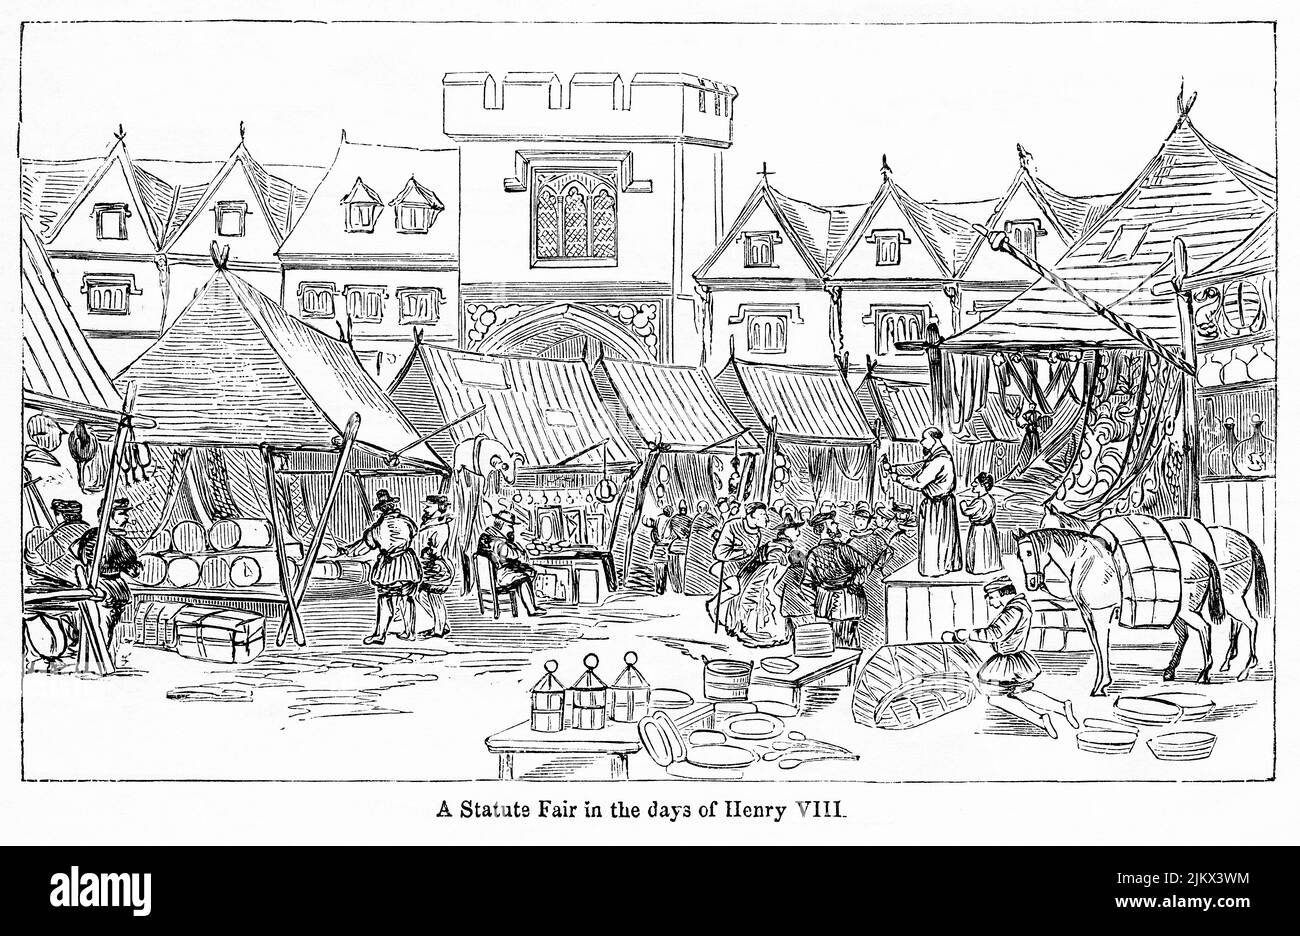 A Statute Fair in the days of Henry VIII, Illustration from the Book, 'John Cassel’s Illustrated History of England, Volume II', text by William Howitt, Cassell, Petter, and Galpin, London, 1858 Stock Photo